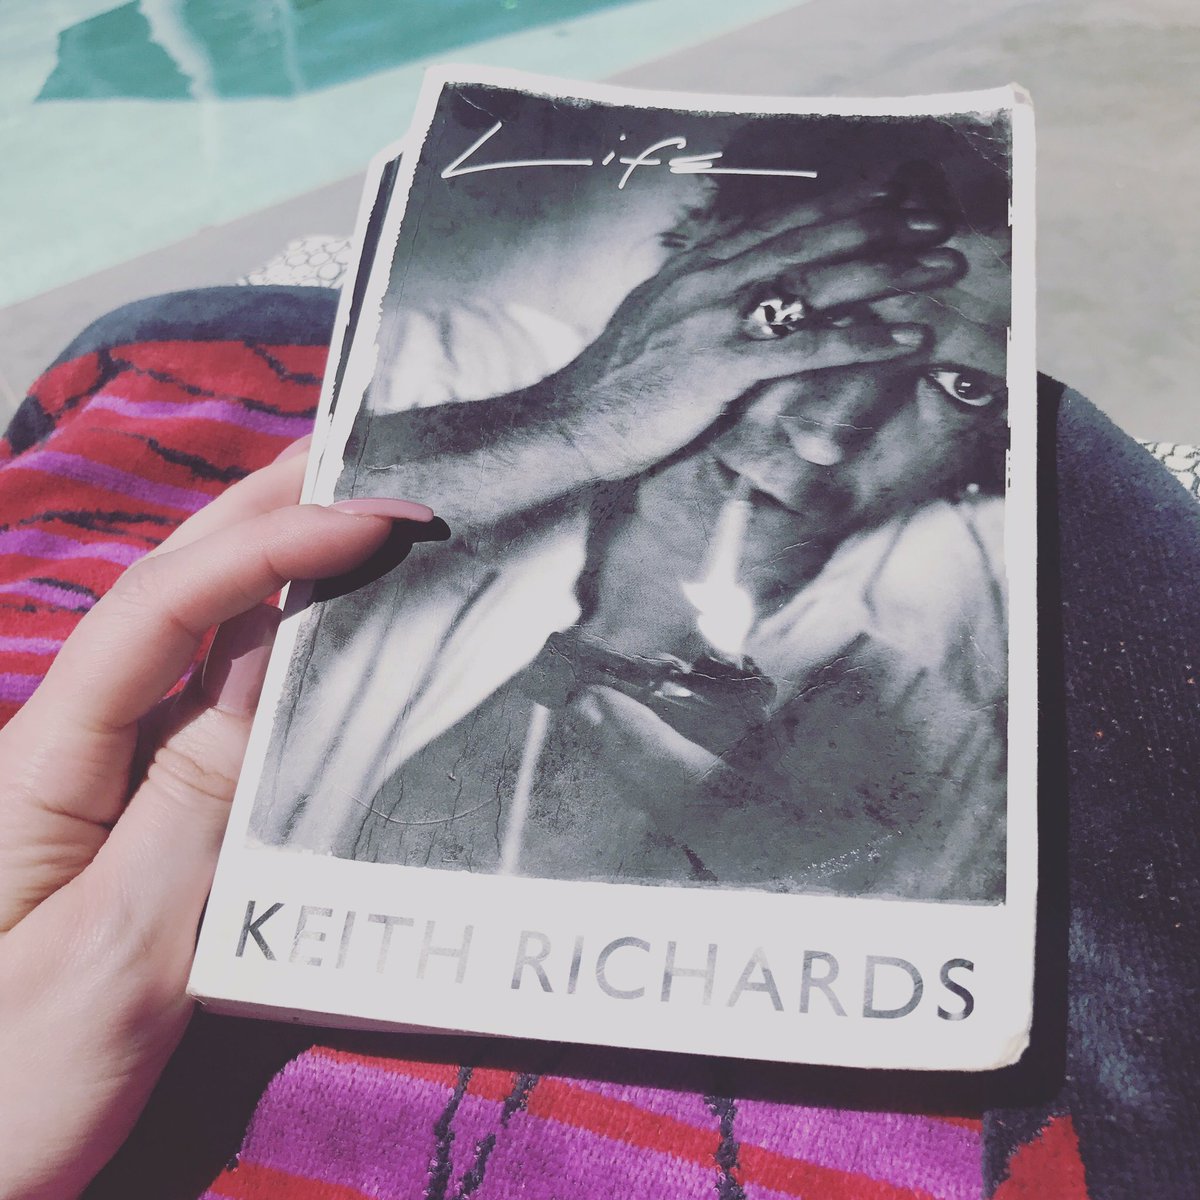 Poolside reading @officialKeef ???? https://t.co/APpptSHEE9